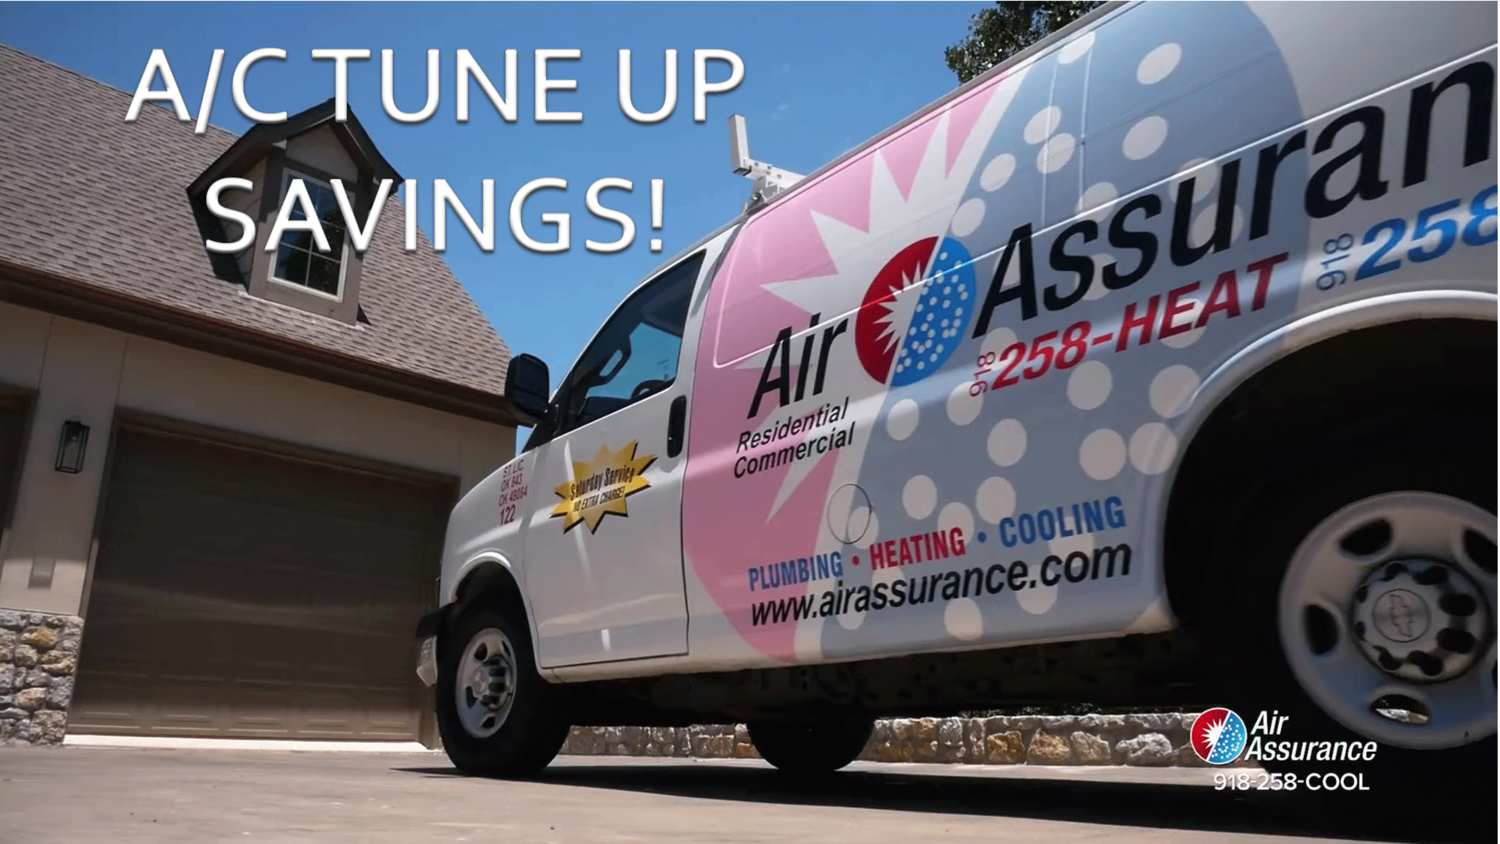 pso-air-conditioning-tune-up-rebate-air-assurance